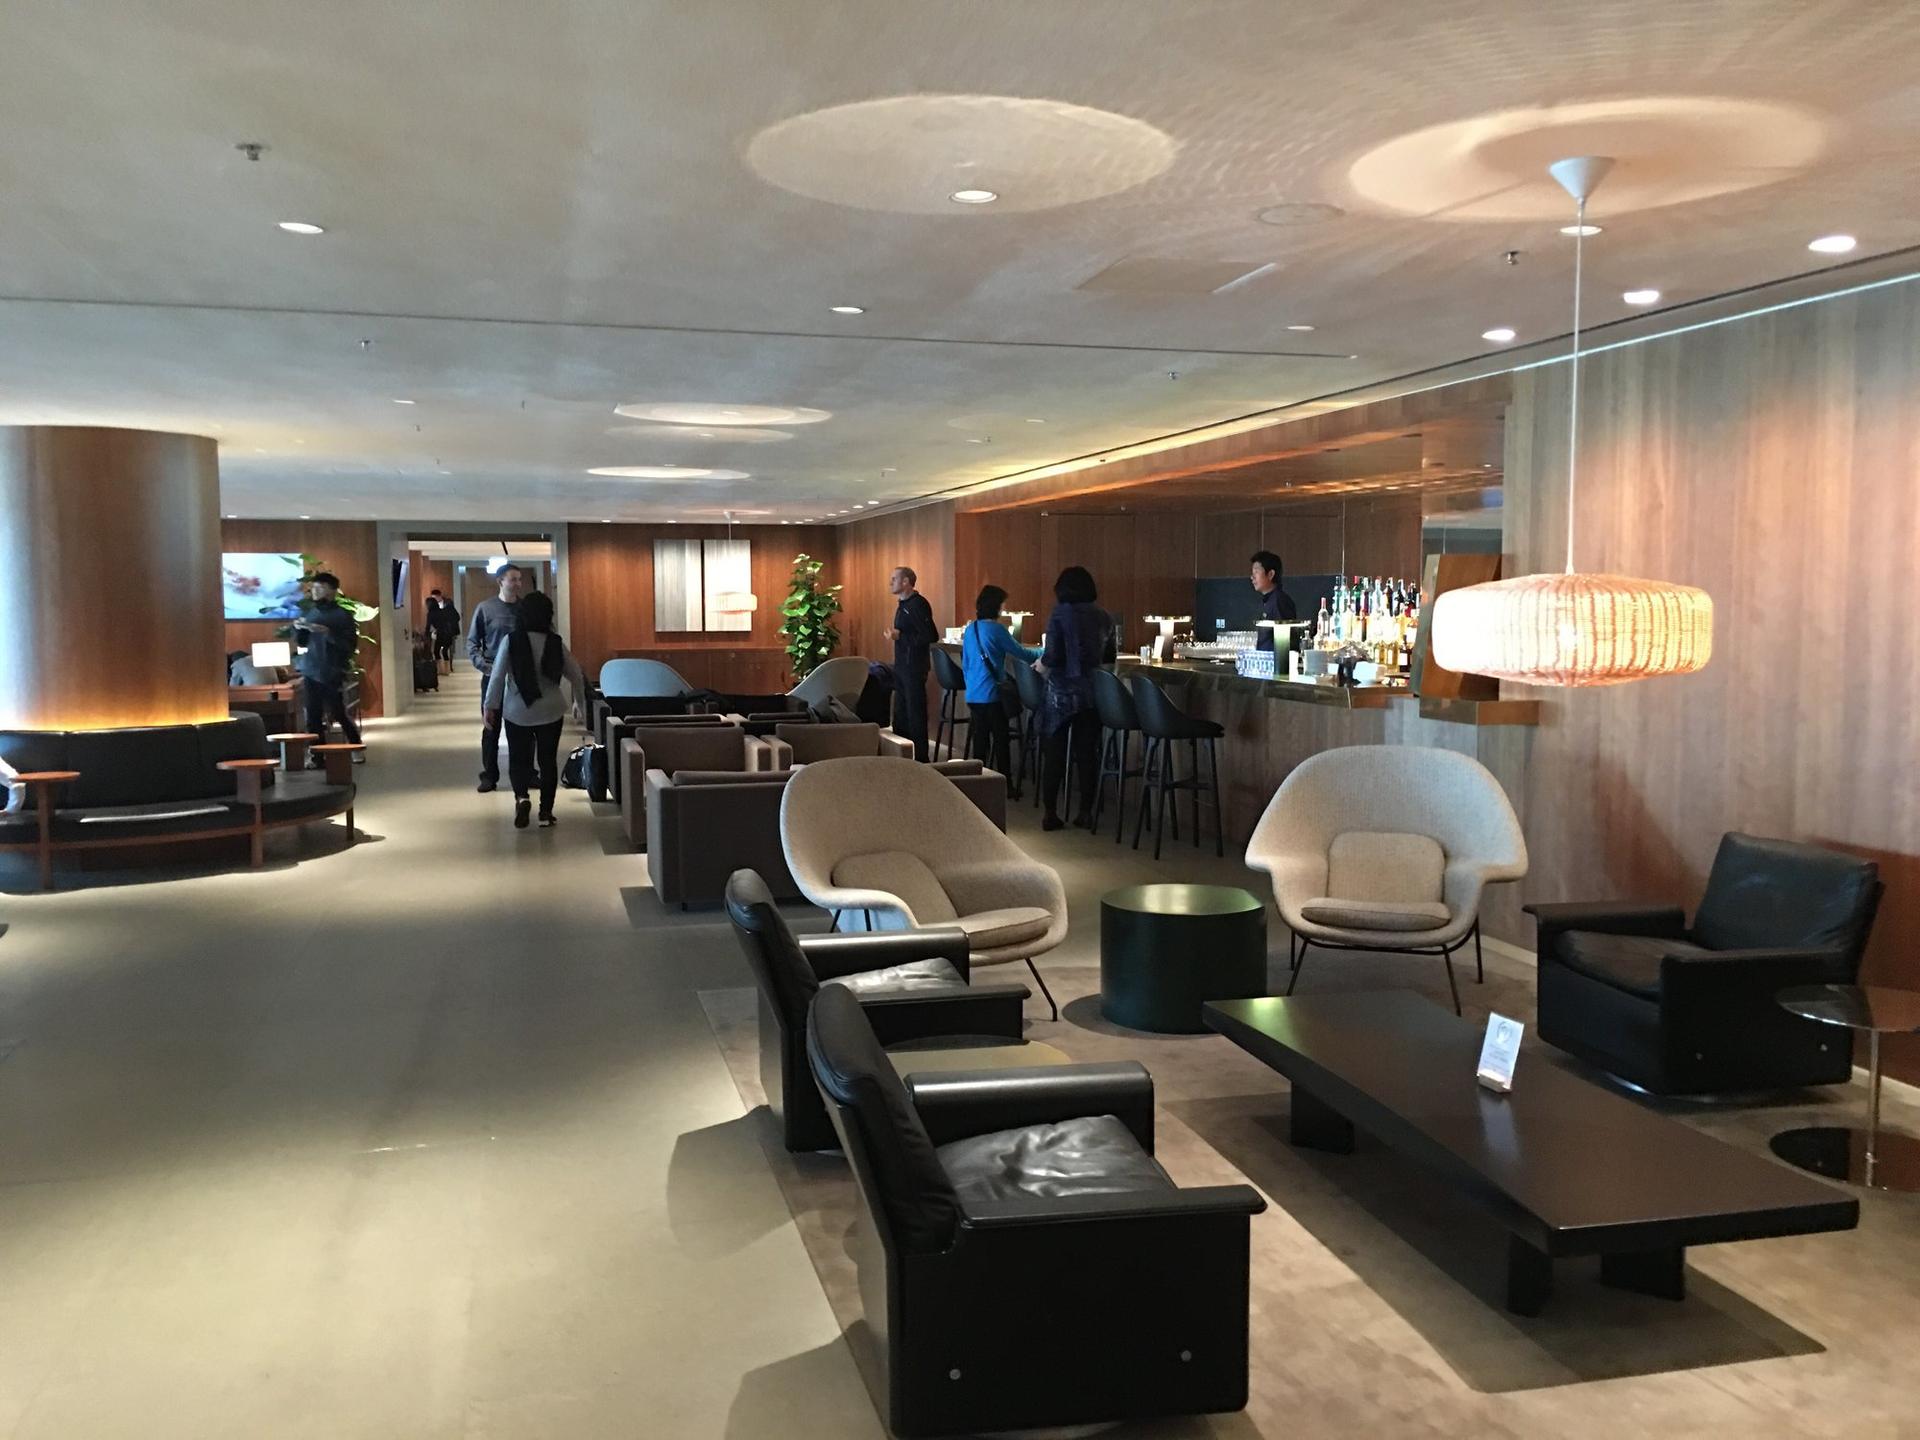 Cathay Pacific The Pier Business Class Lounge image 38 of 61